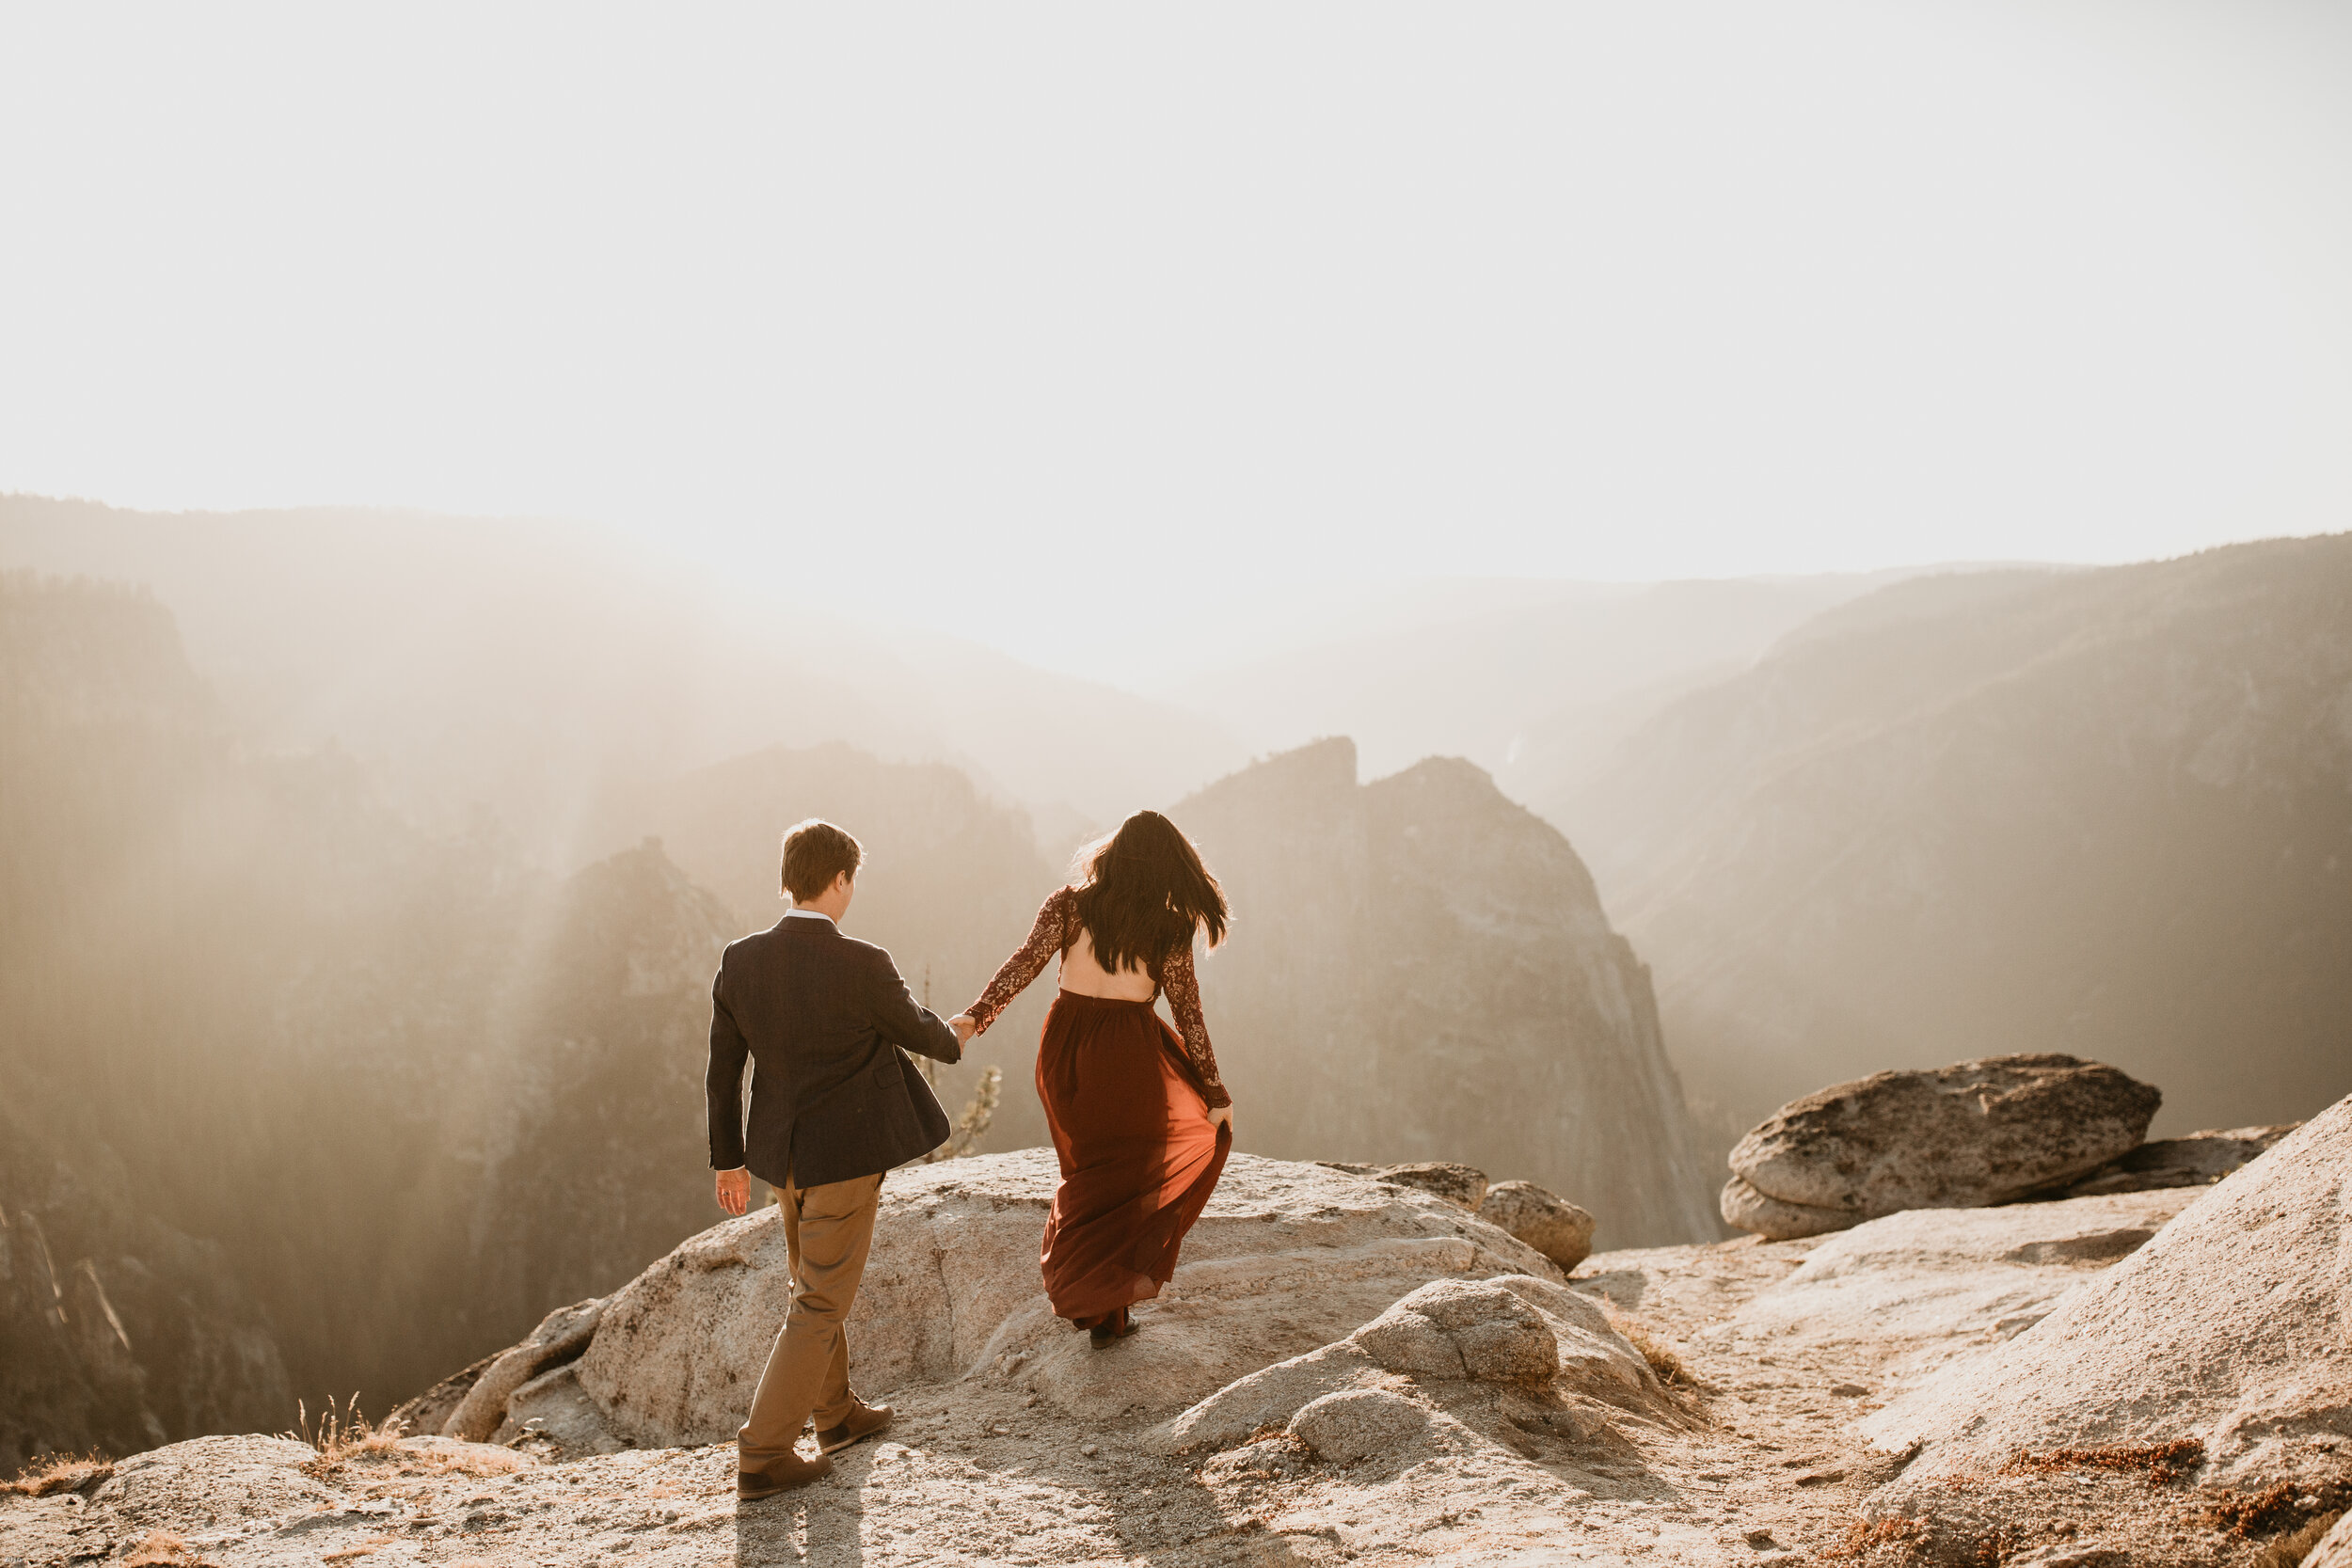 yosemite-national-park-couples-session-at-taft-point-and-yosemite-valley-yosemite-elopement-photographer-nicole-daacke-photography-133.jpg